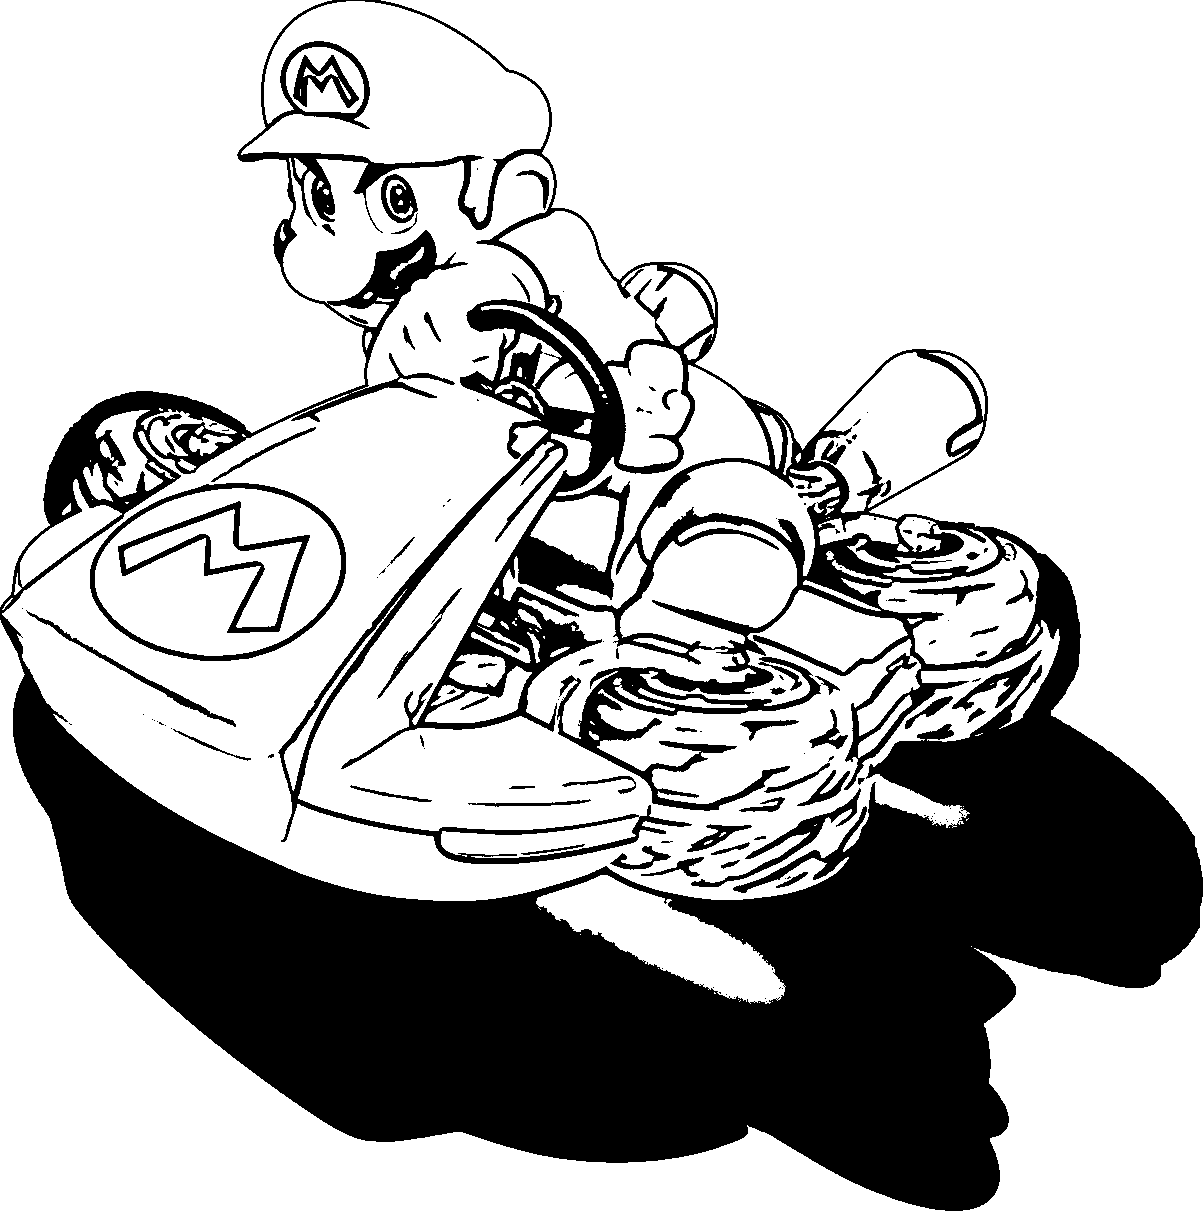 Mario Kart 8 Colouring Pictures - High Quality Coloring Pages